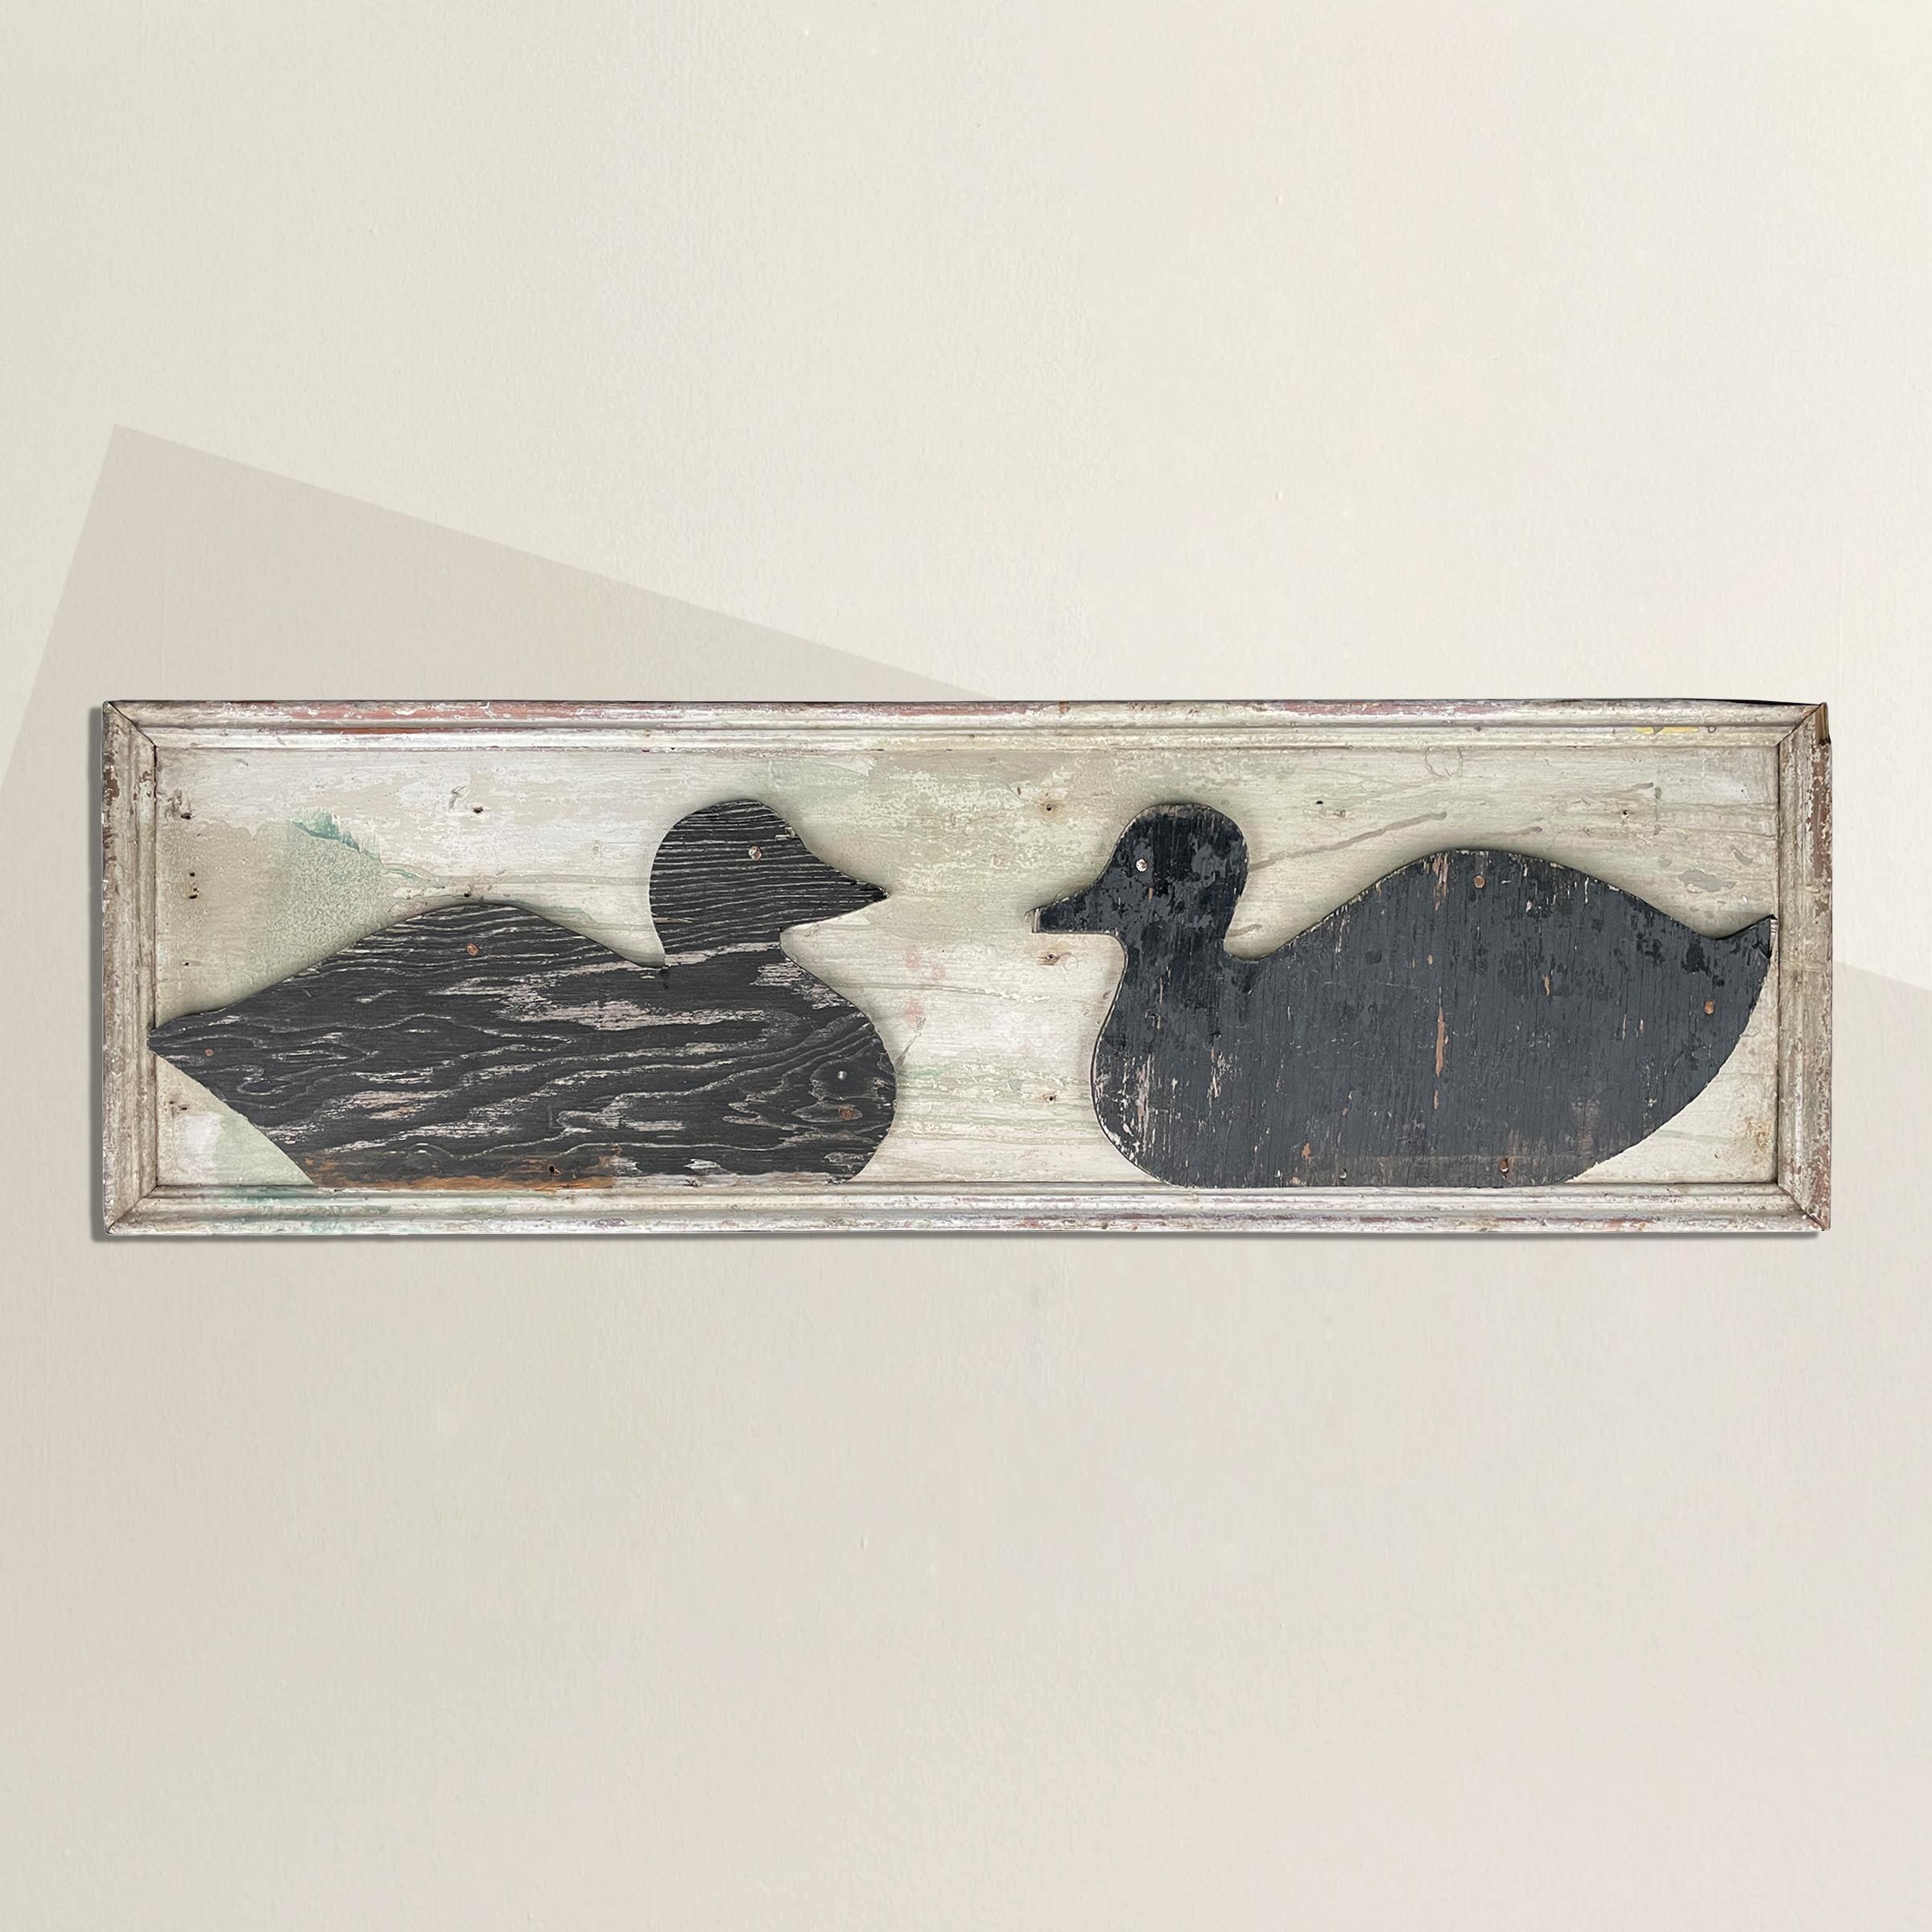 A charming early 20th century American folk art sign with two ducks, each cut out from ply wood and painted black, and attached to a white painted frame. Found in New England.